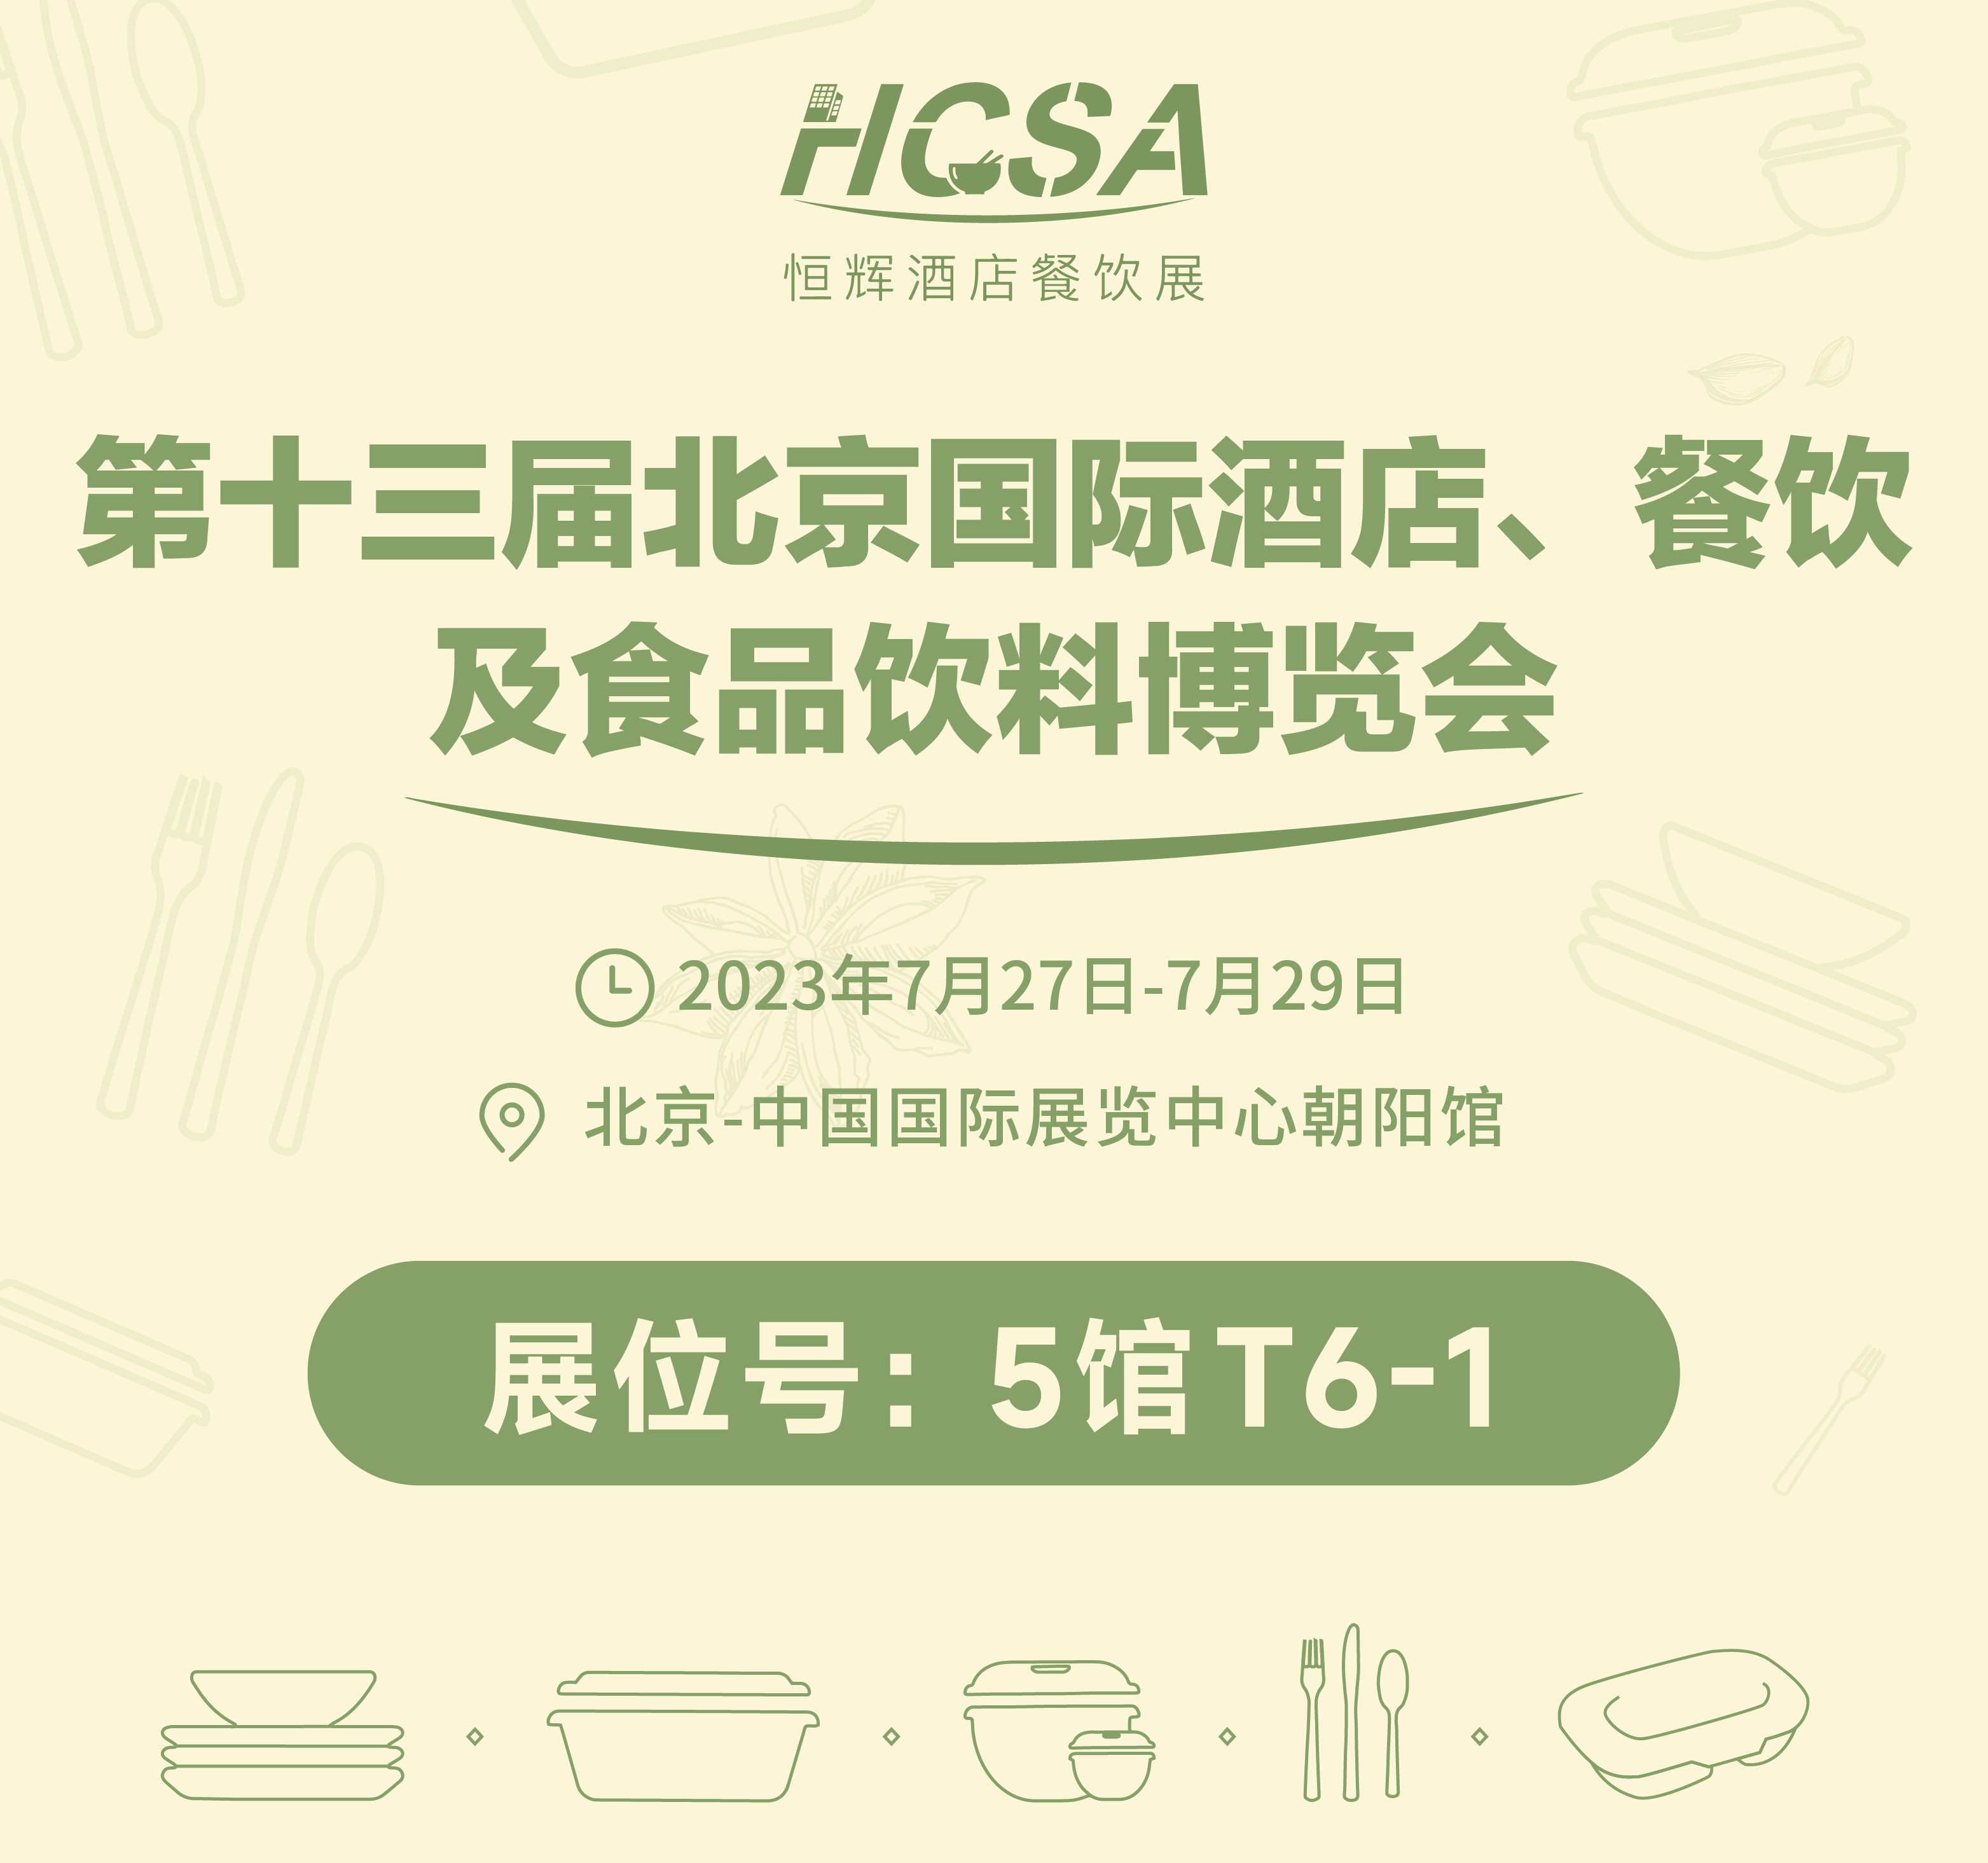 HCSA in Beijing from July 27 to 29, 2023